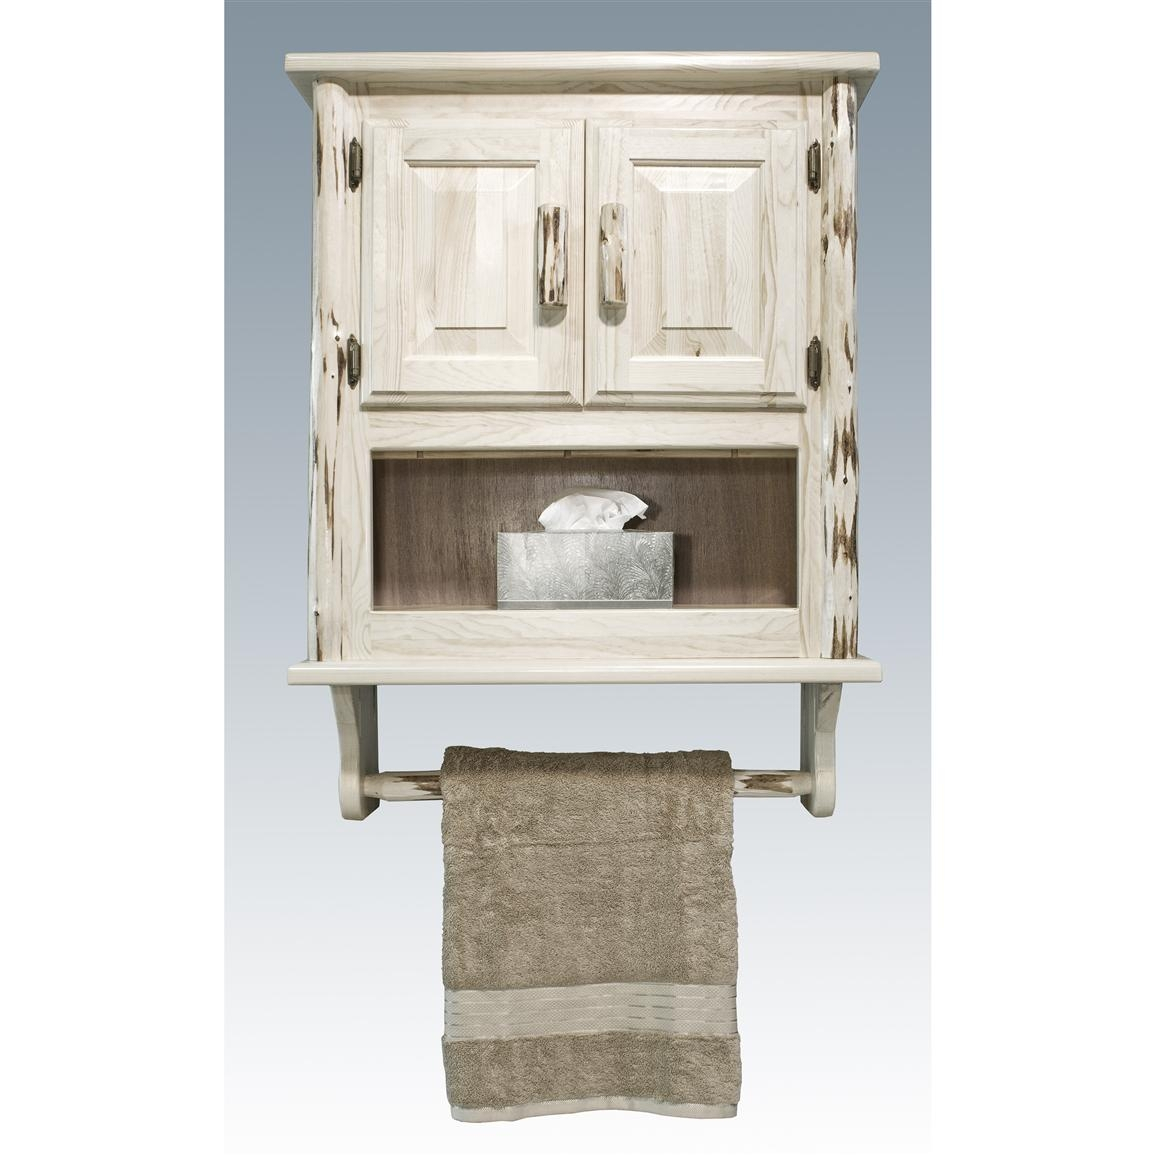 Bathroom Wall Cabinets Rustic Bathroom Cabinets Ideas Cottage Style inside sizing 1155 X 1155